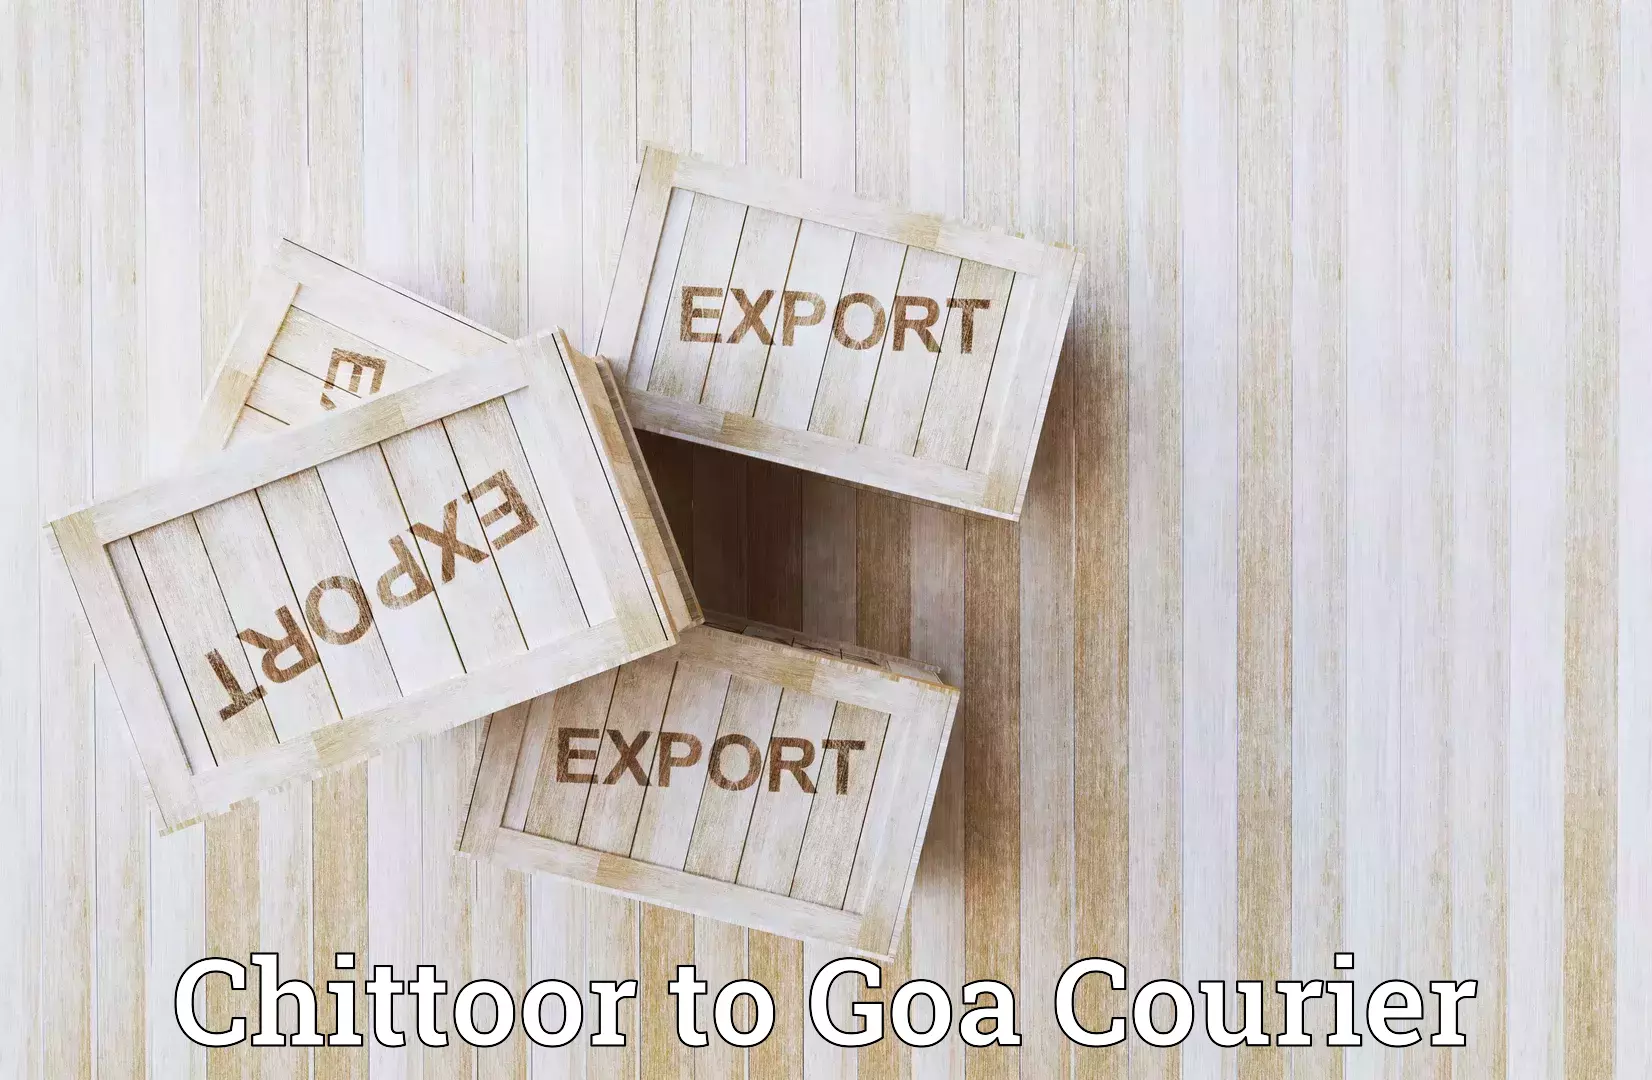 State-of-the-art courier technology Chittoor to Goa